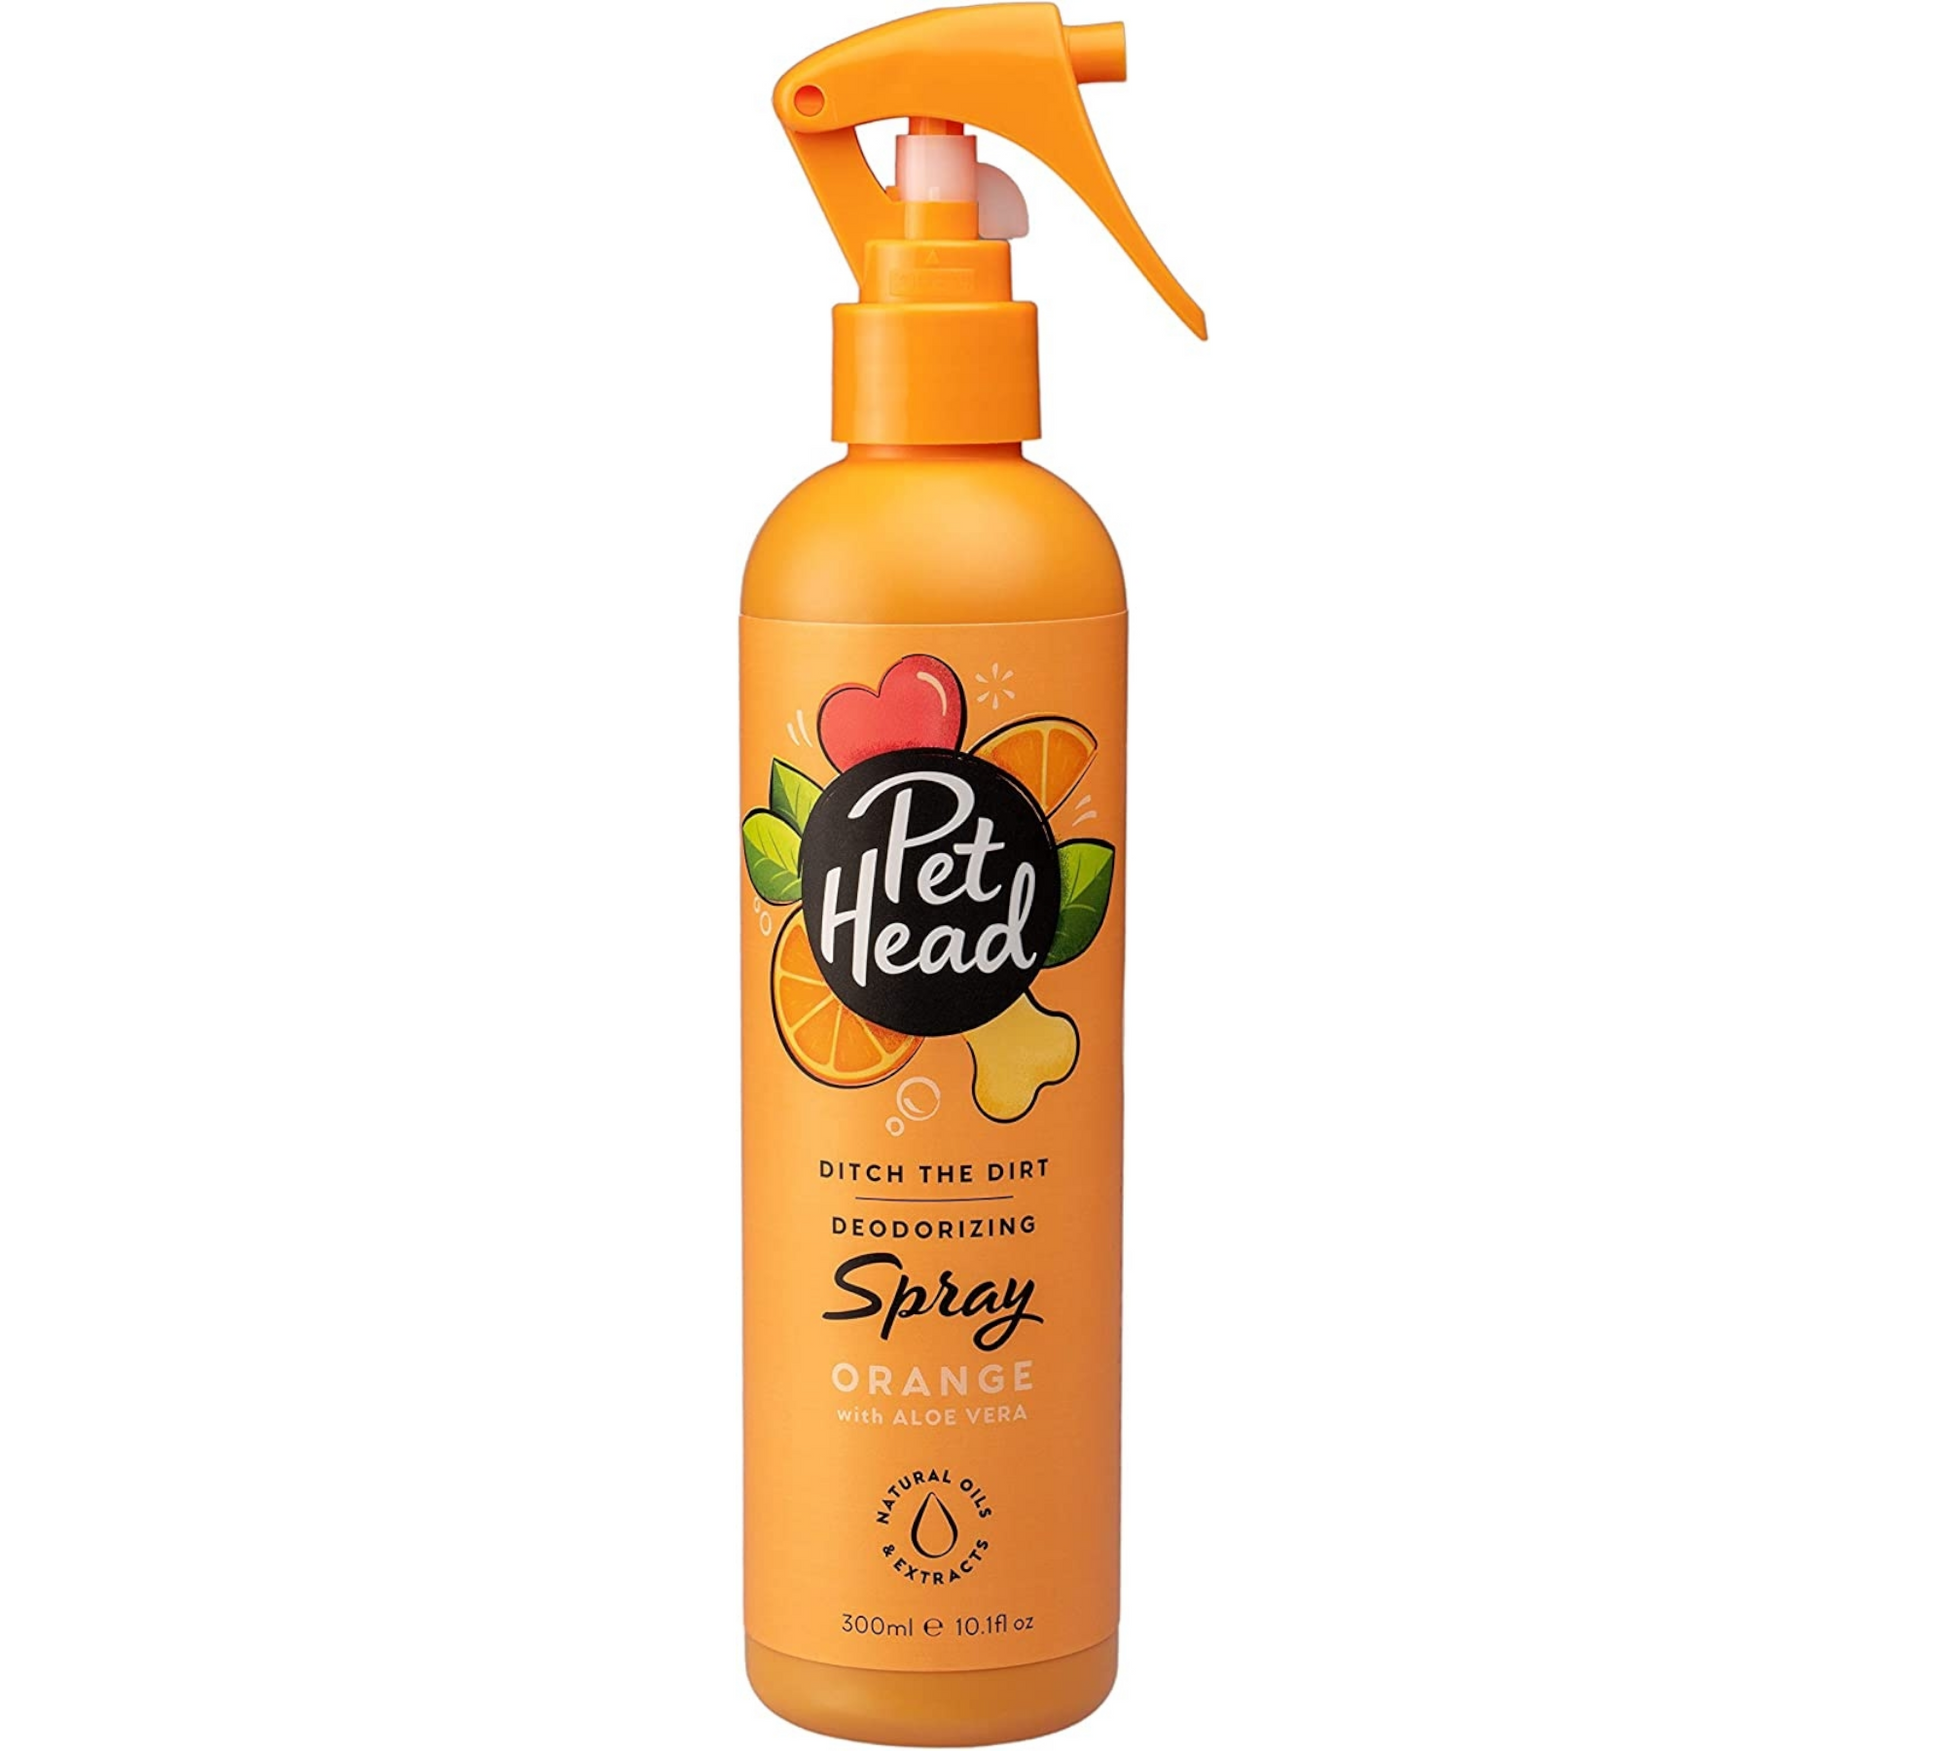 Canine's World Dog Cologne Pet Head Ditch the Dirt Deodorizing Spray for Dogs Orange with Aloe Vera Pet Head